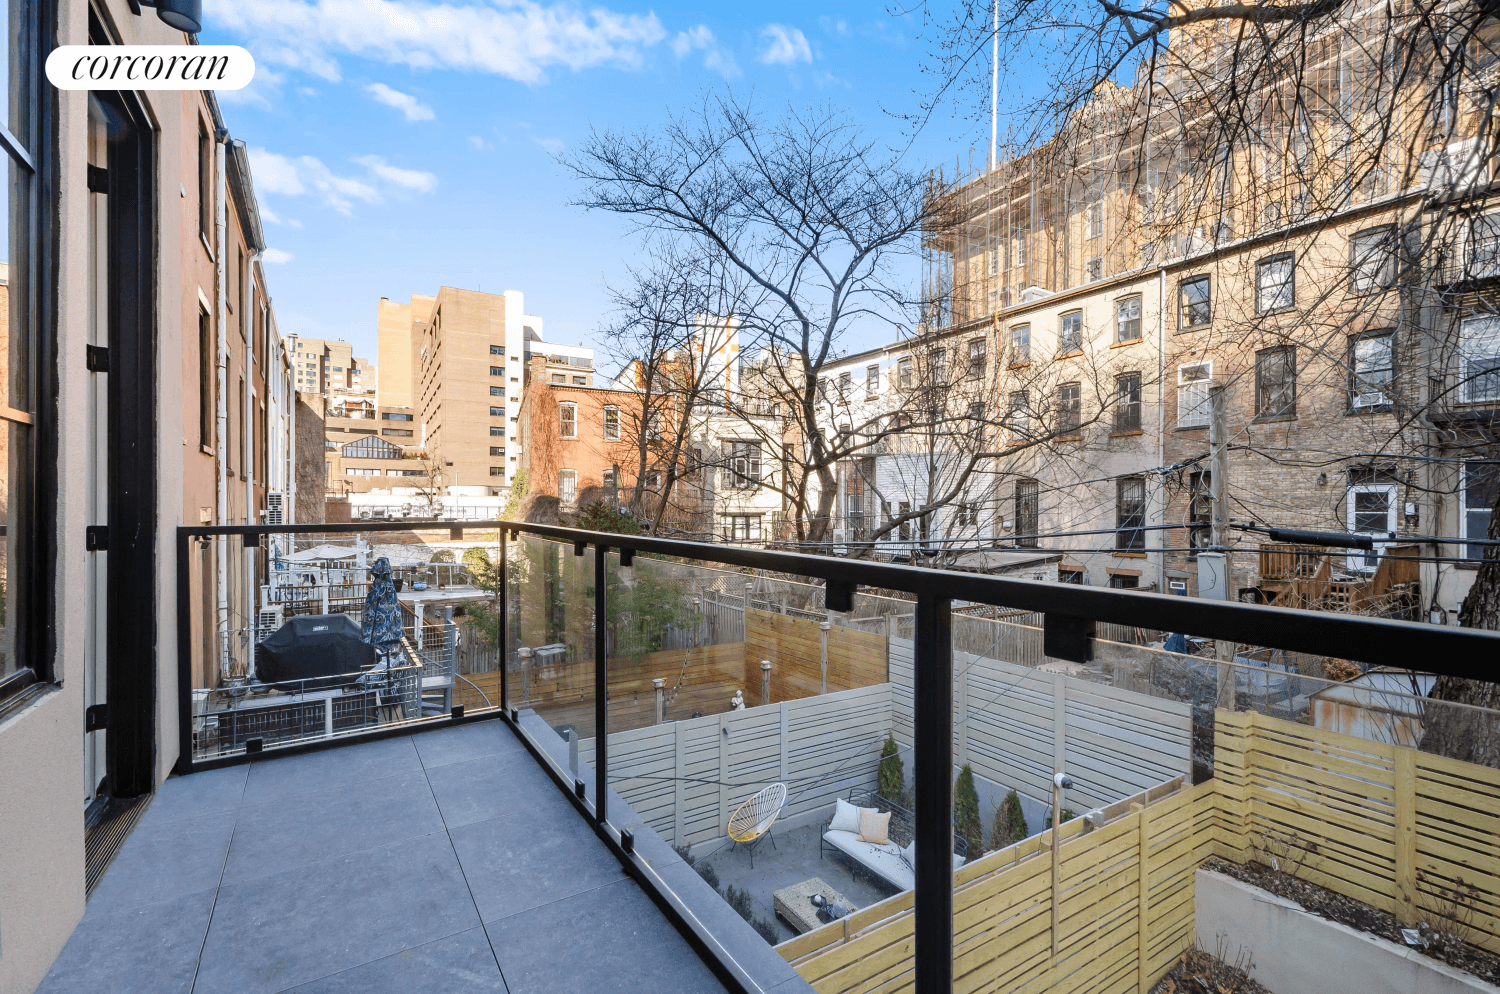 19 St Felix is a Triple Mint Single Family Townhouse in Prestigious Fort Greene, one block from BAM, Caf Paulette and Fort Greene Park.